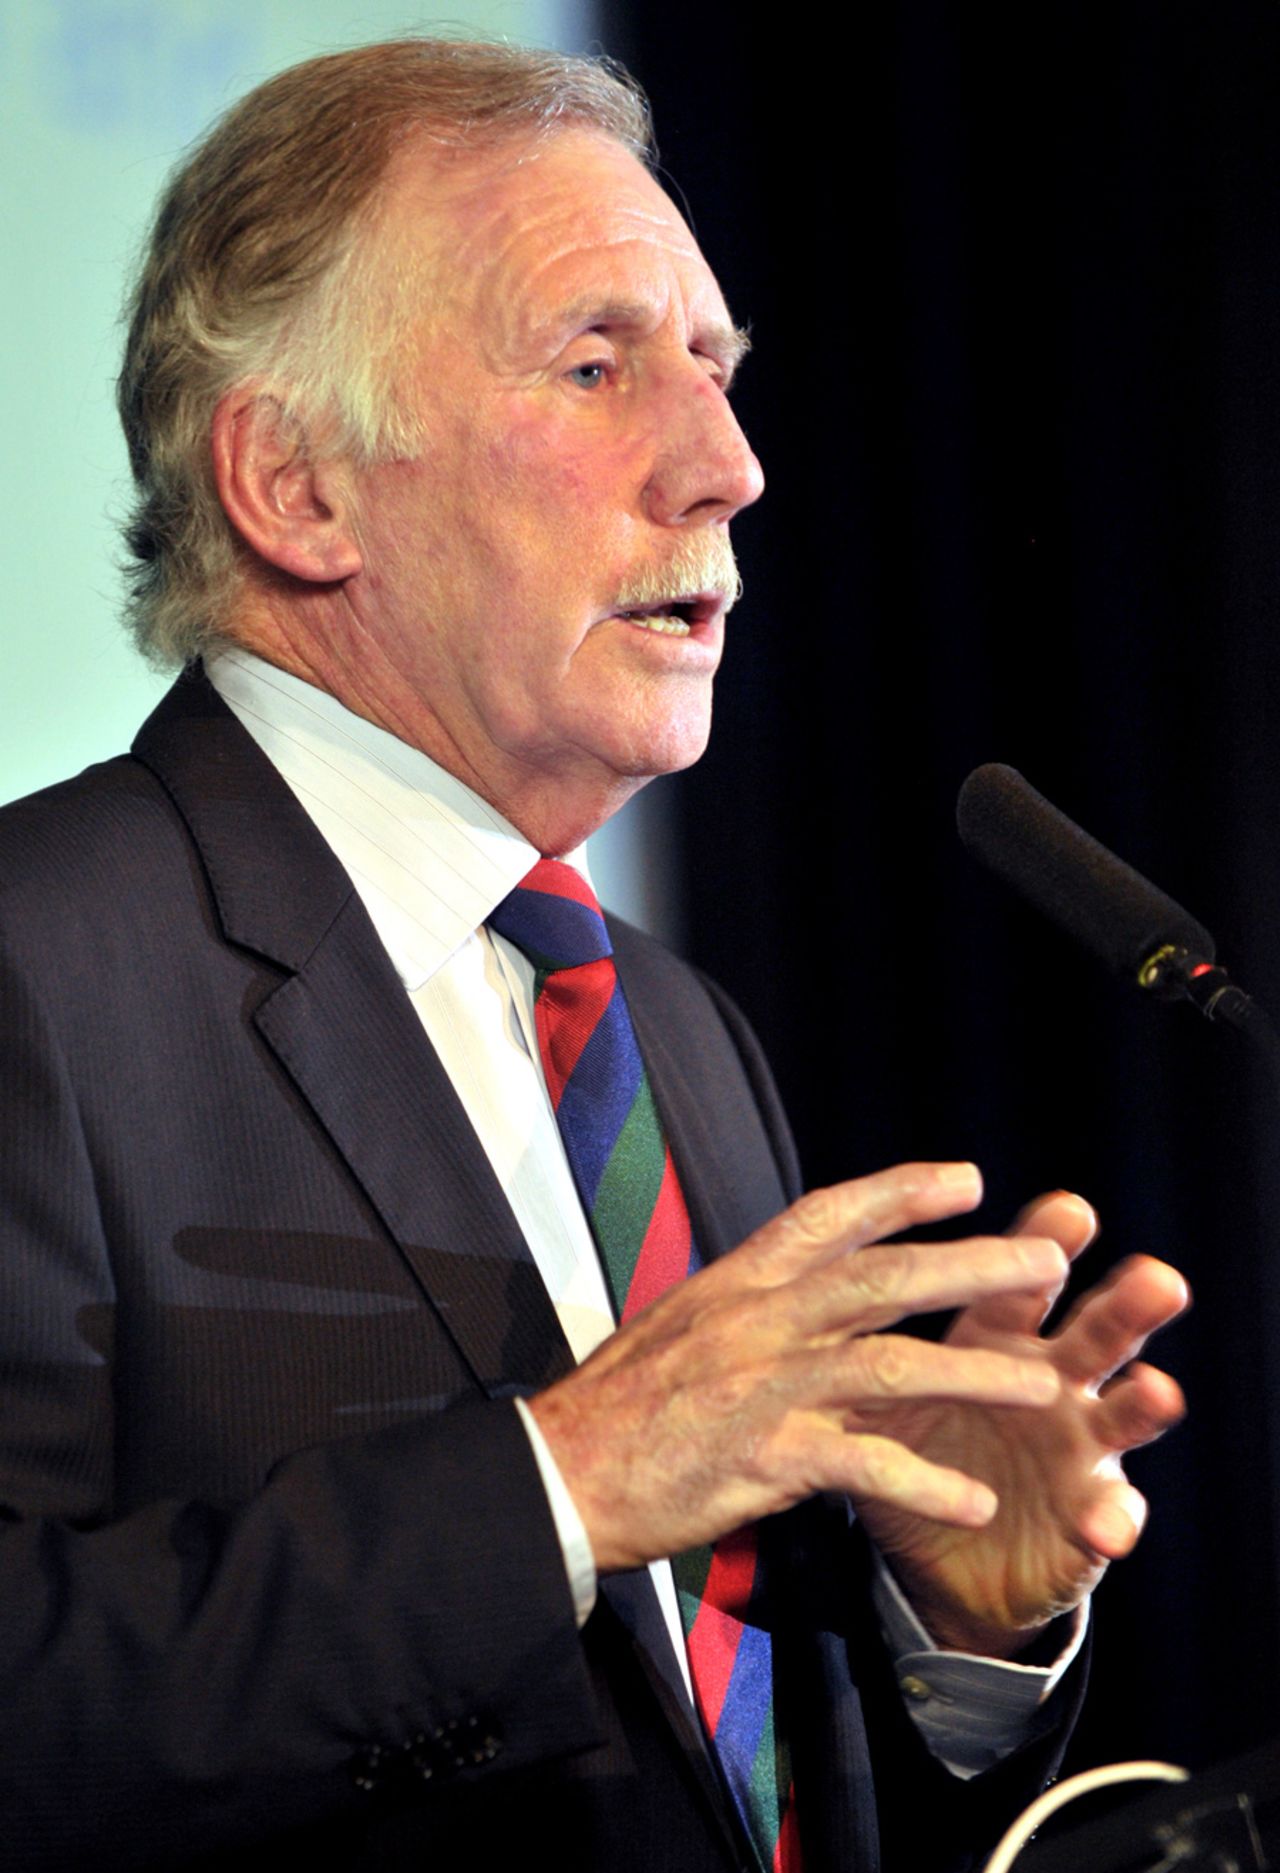 Ian Chappell speaks at the ESPNcricinfo for Cricket Summit in Brisbane, November 19, 2013